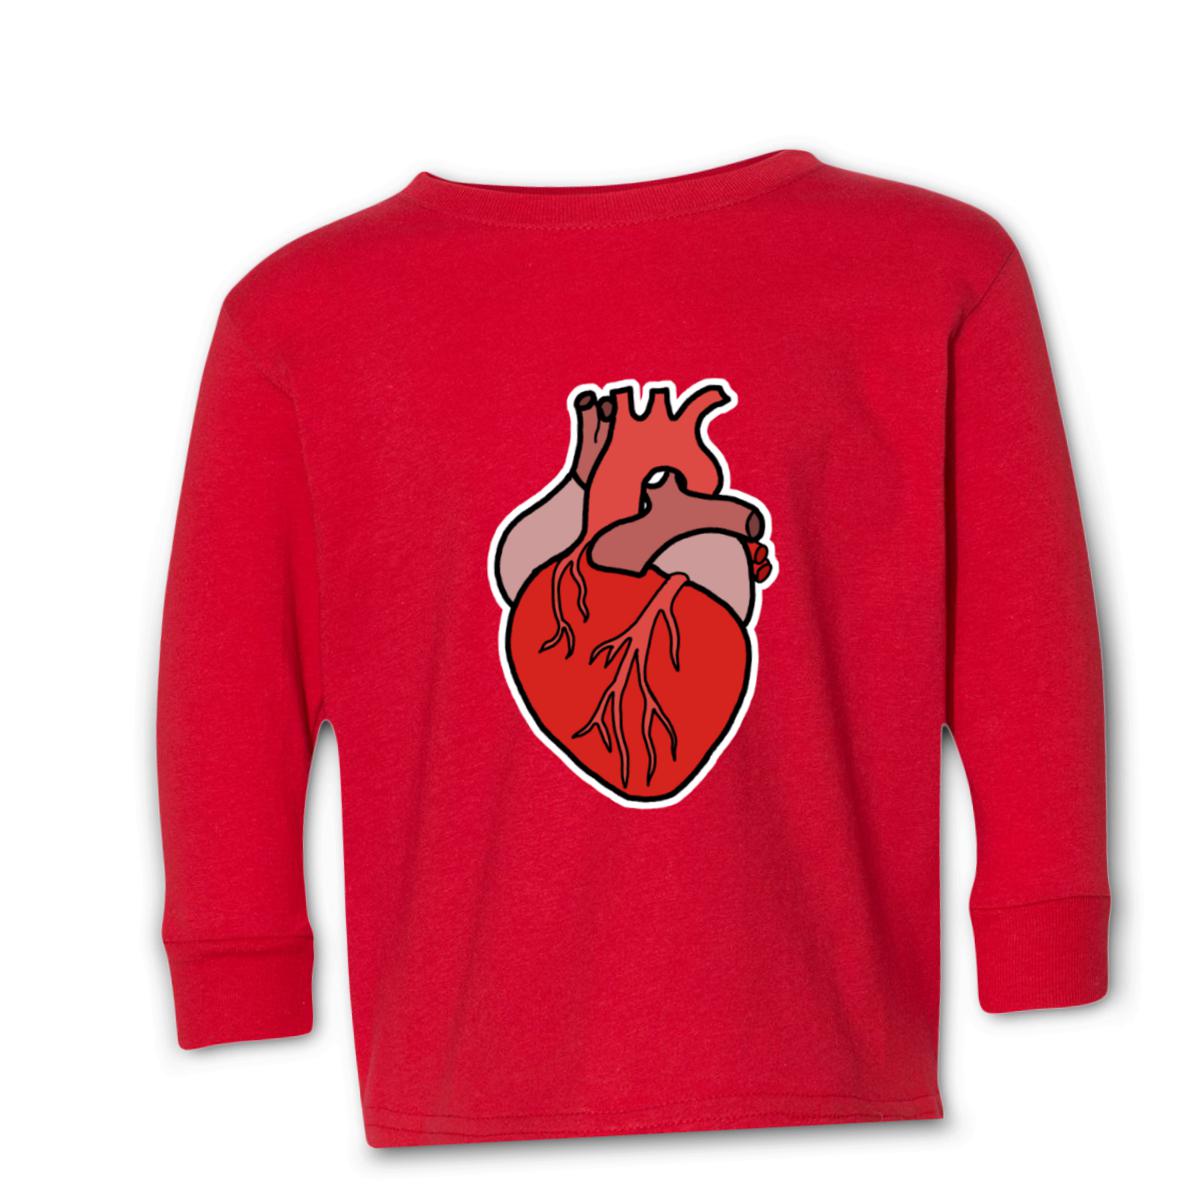 Illustrative Heart Toddler Long Sleeve Tee 2T red